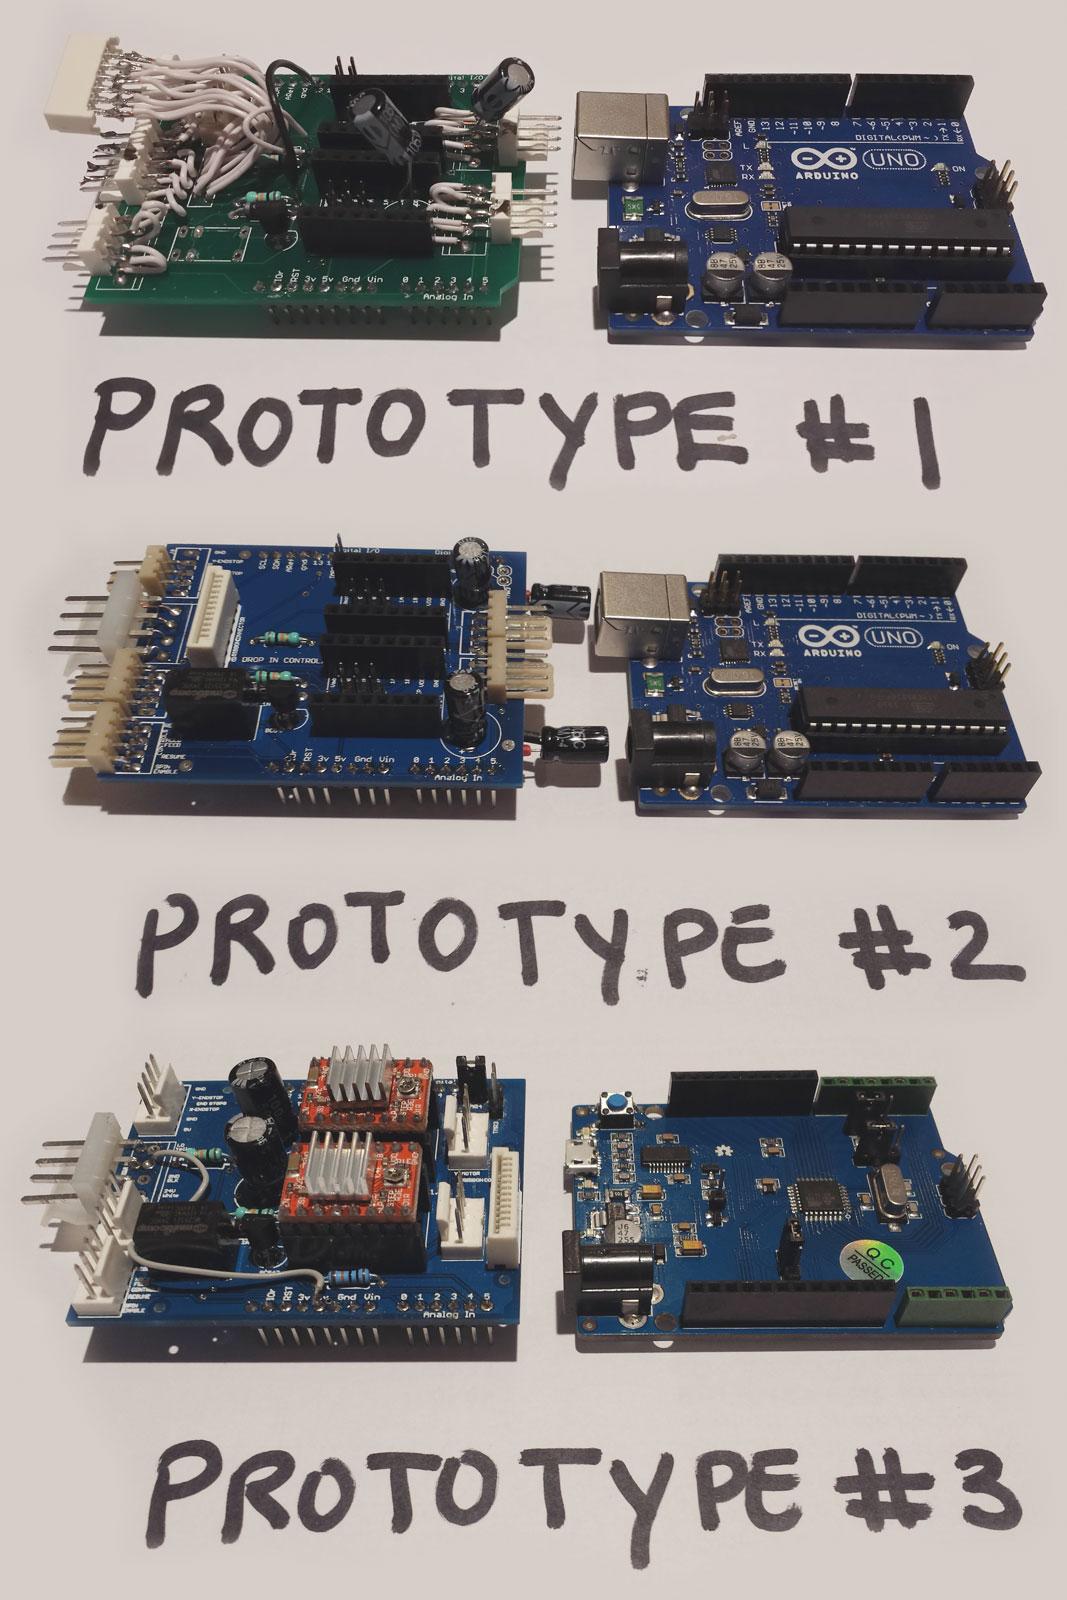 The prototypes saw several iterations.